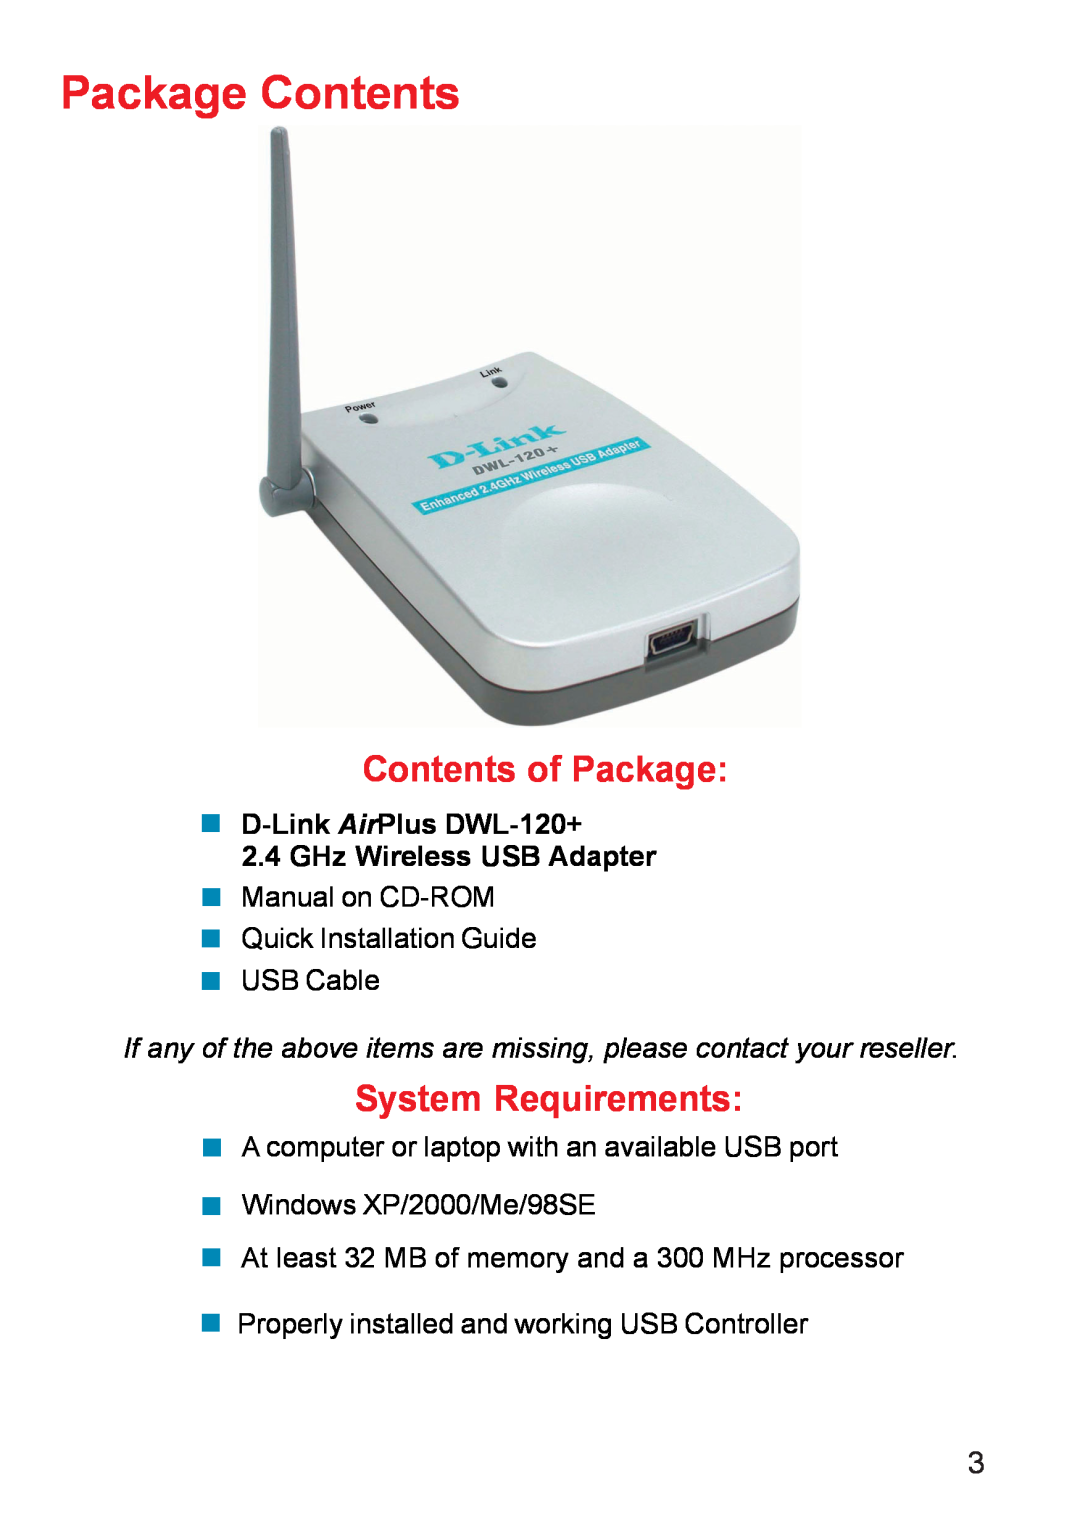 D-Link DWL-120+ manual Contents of Package, System Requirements, Package Contents 